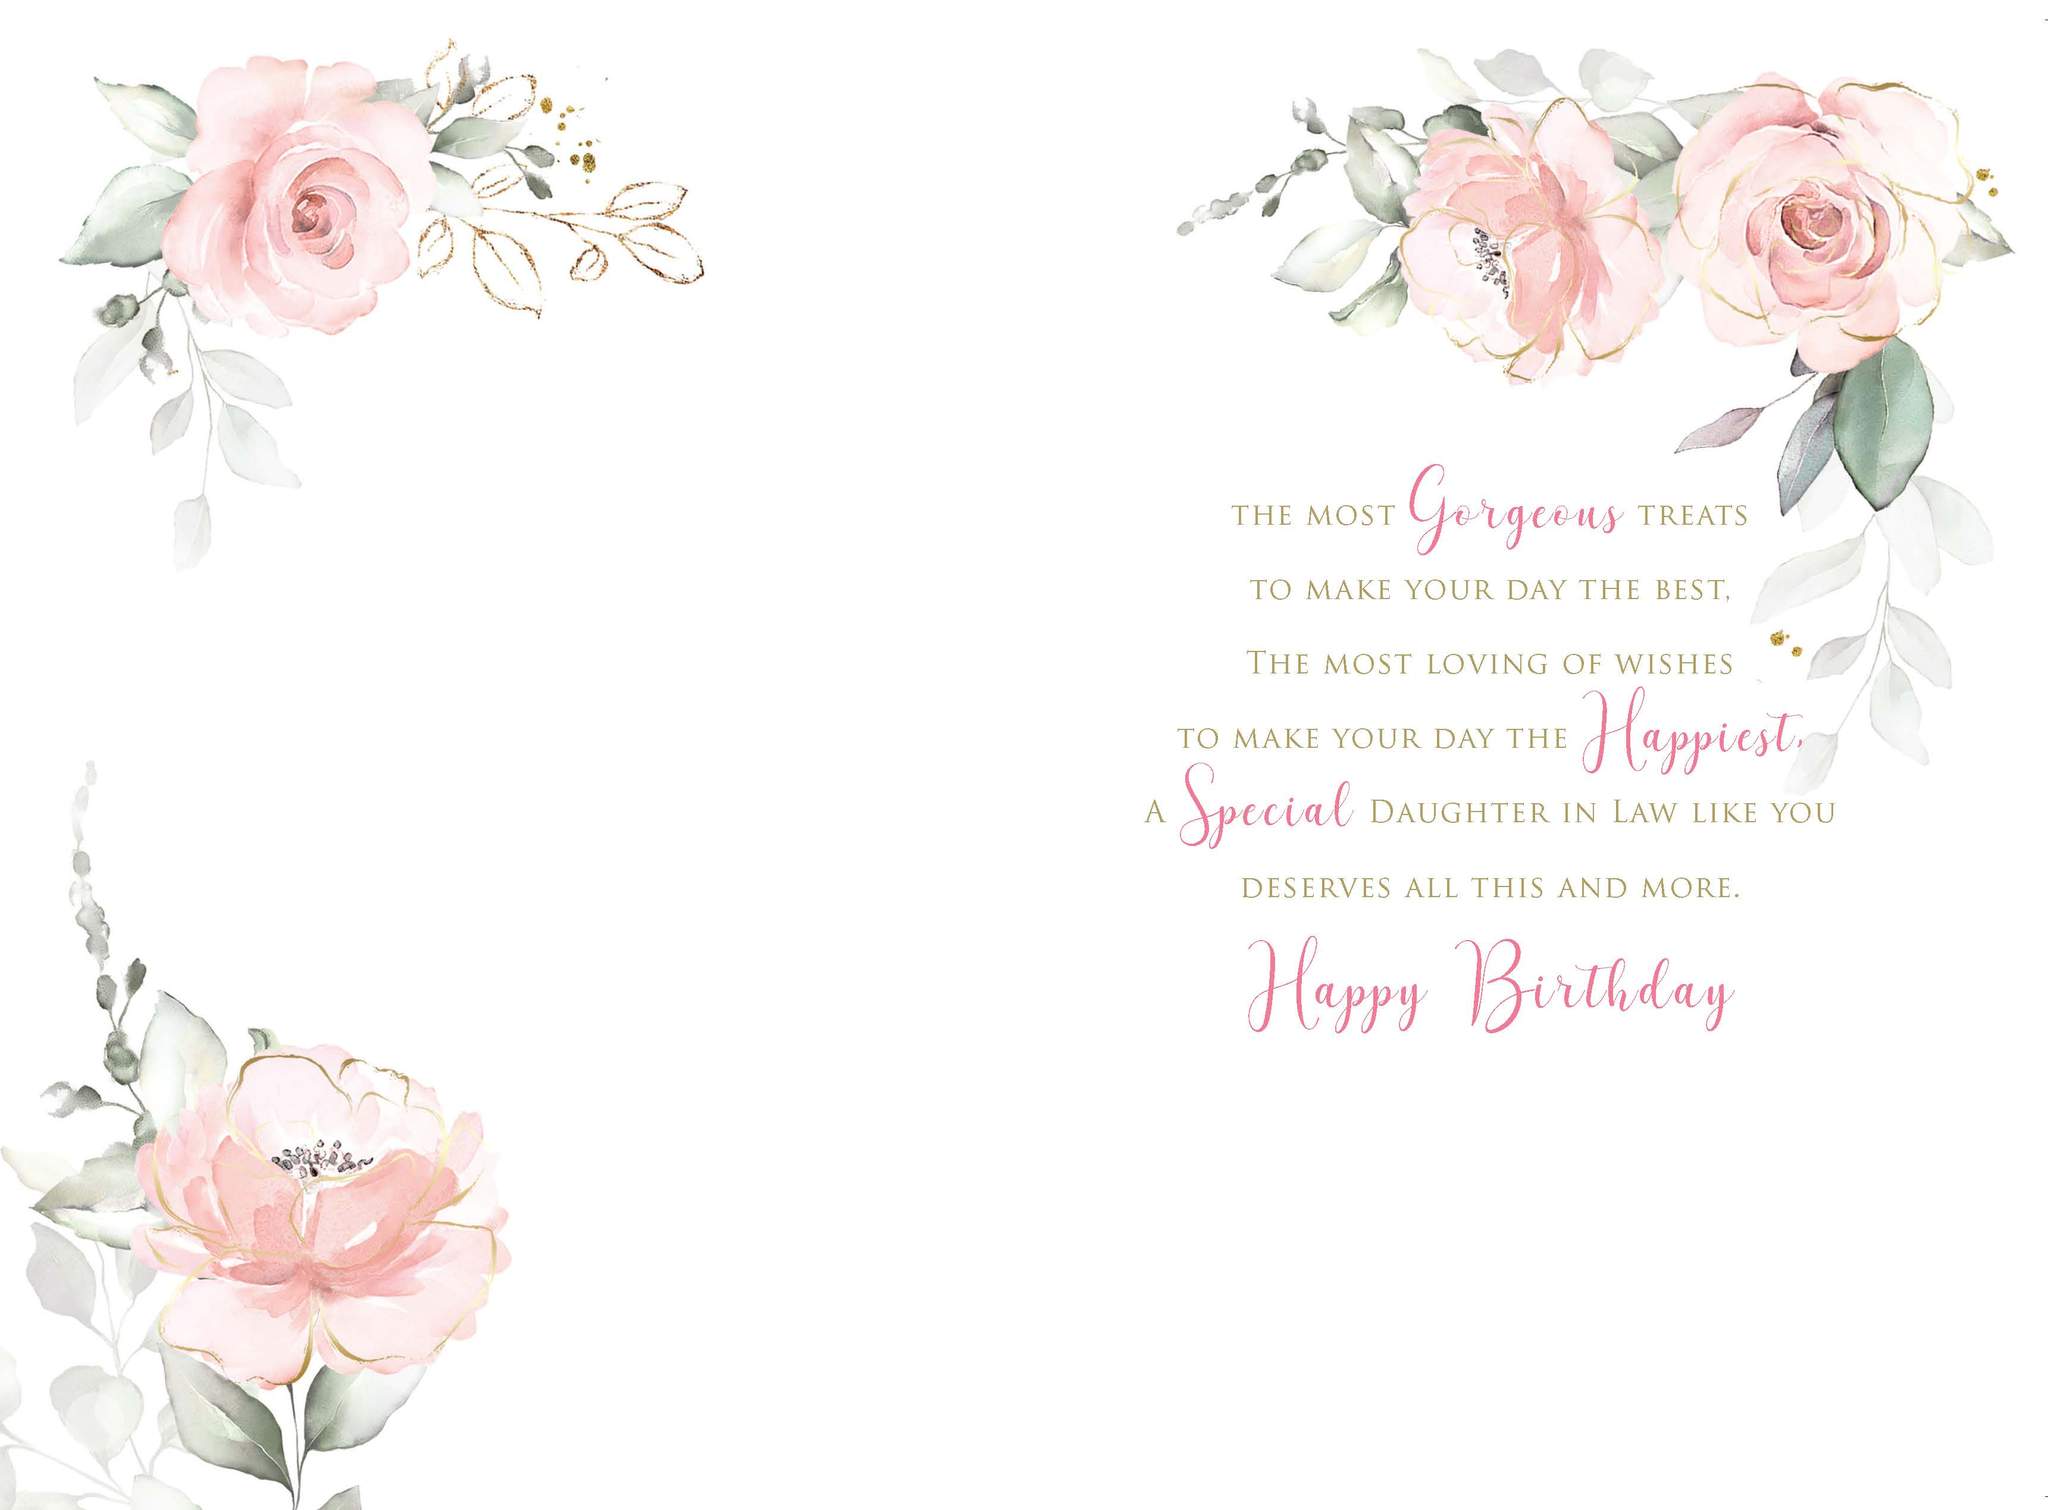 Daughter-in-Law Birthday Card - Rose Flowers